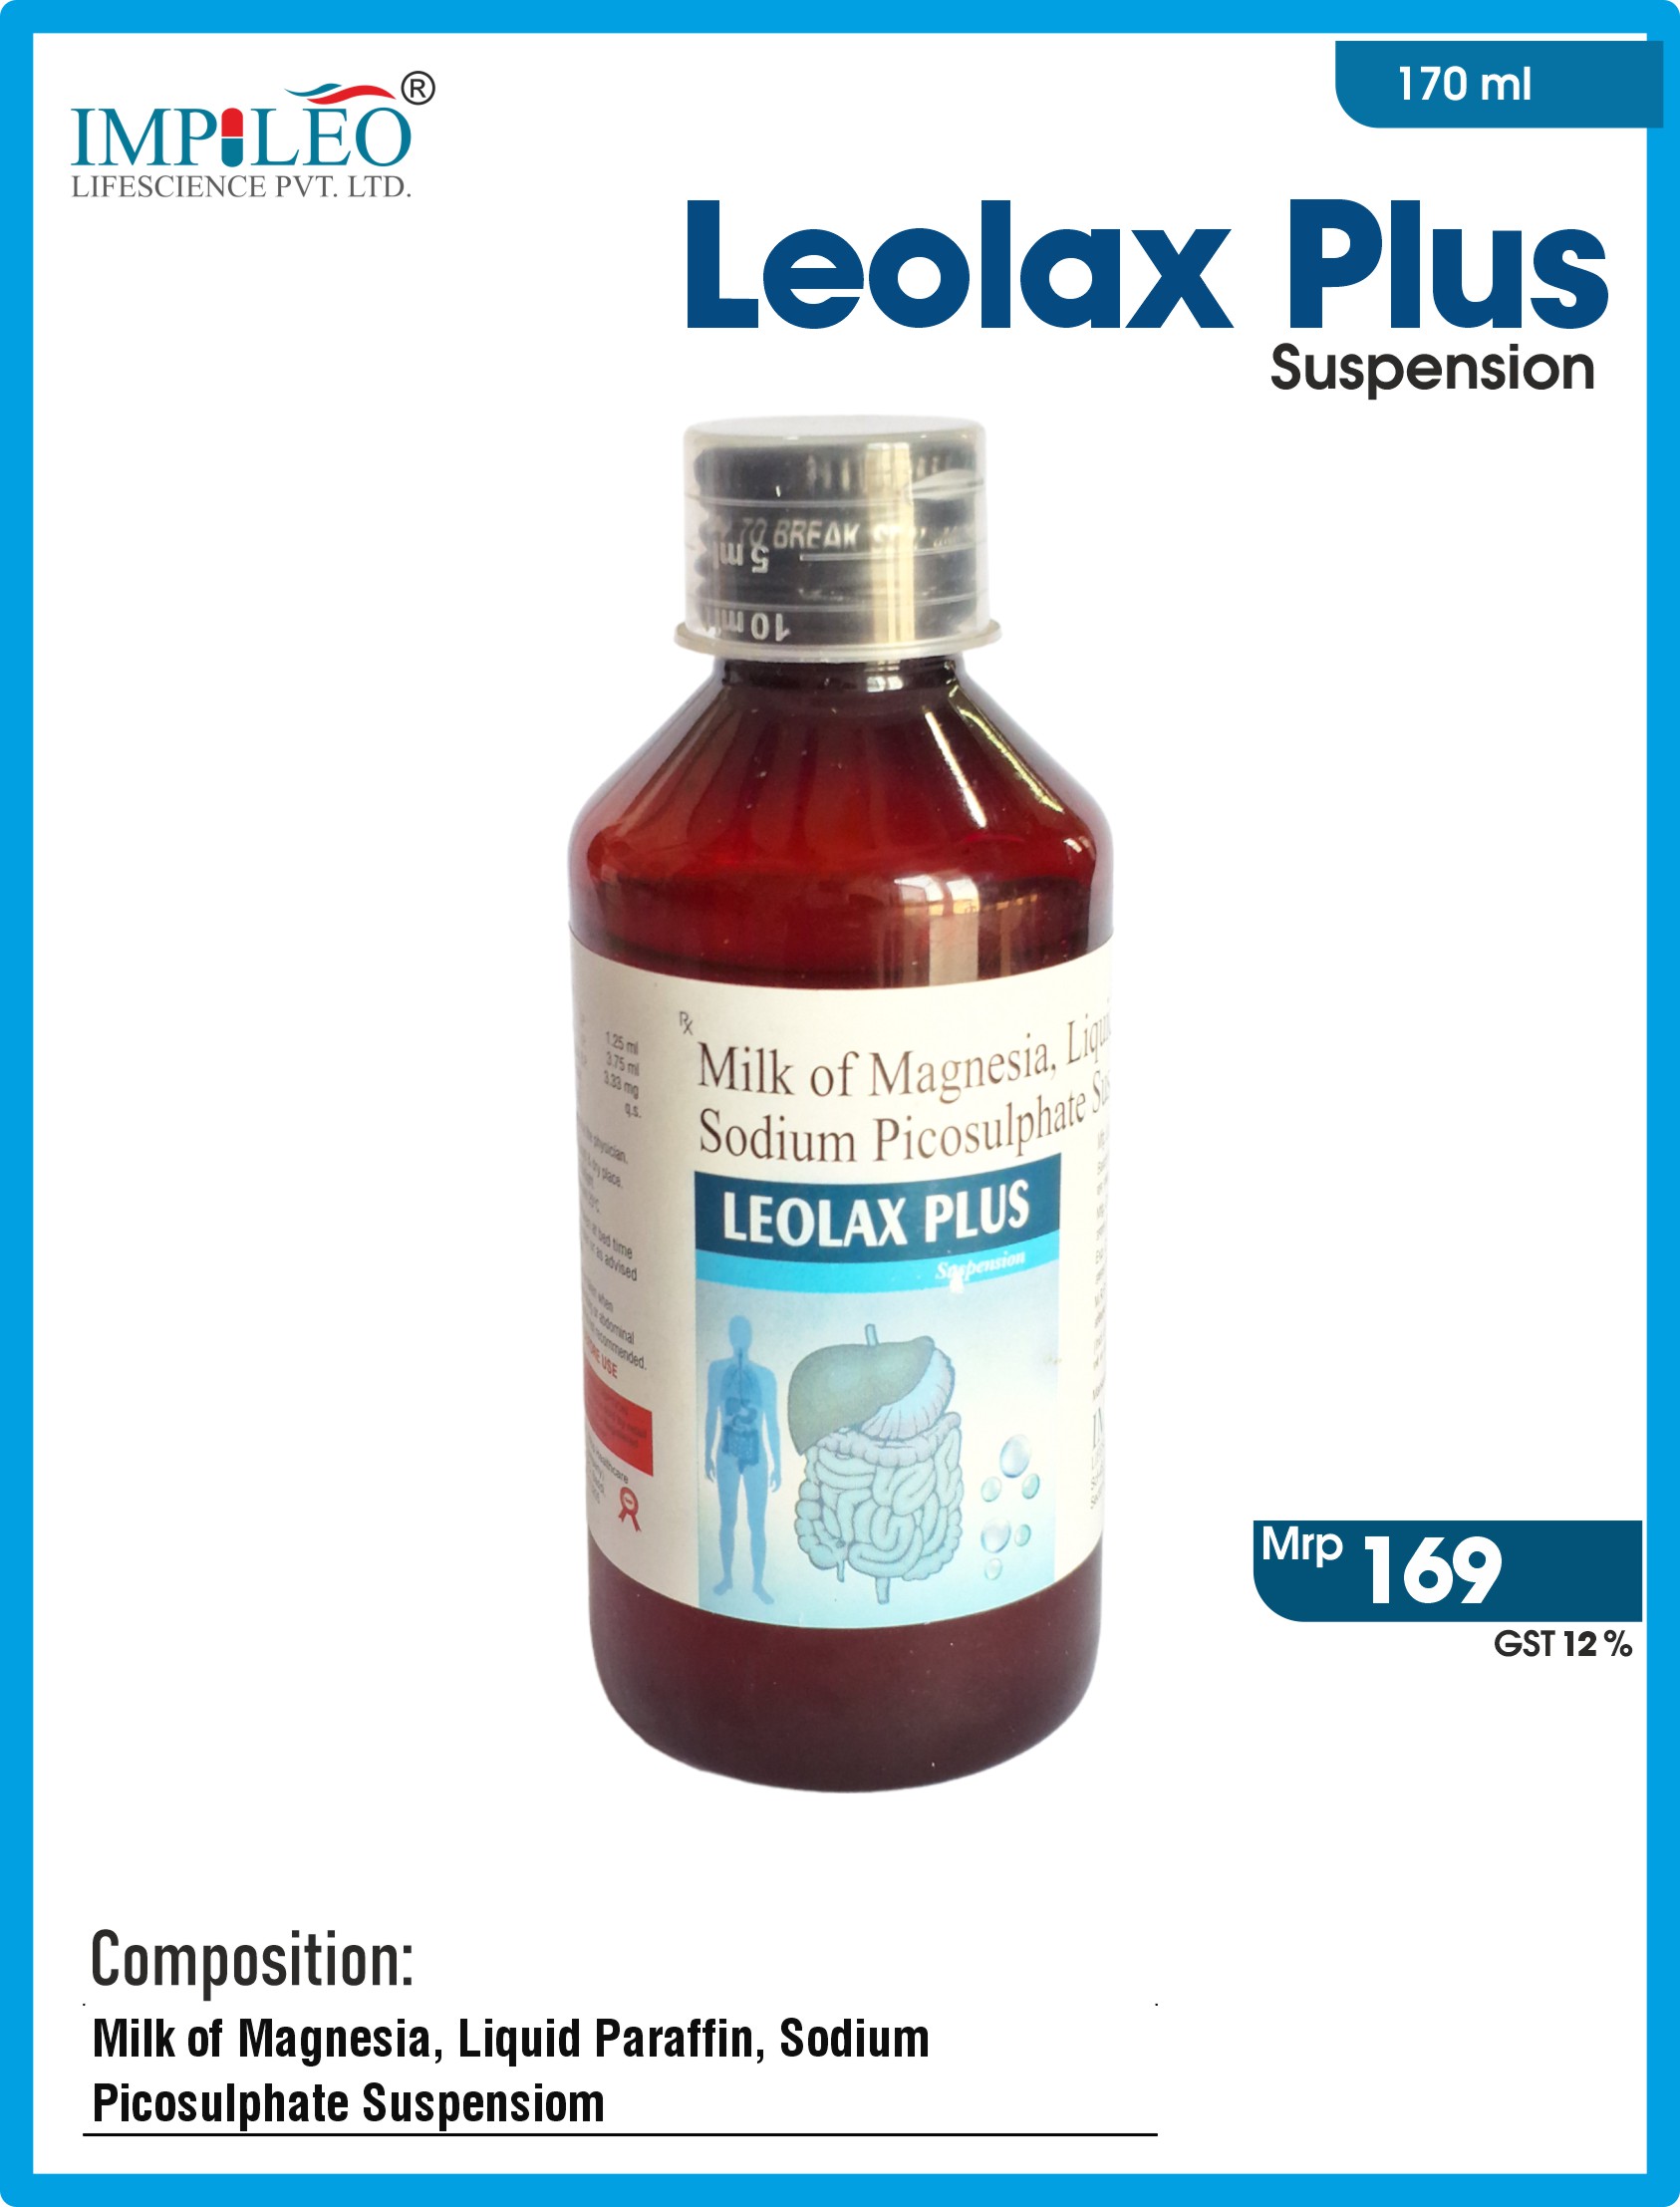 LEOLAX PLUS SYRUP : Elevating Digestive Health with Premier Third-Party Manufacturing in Baddi